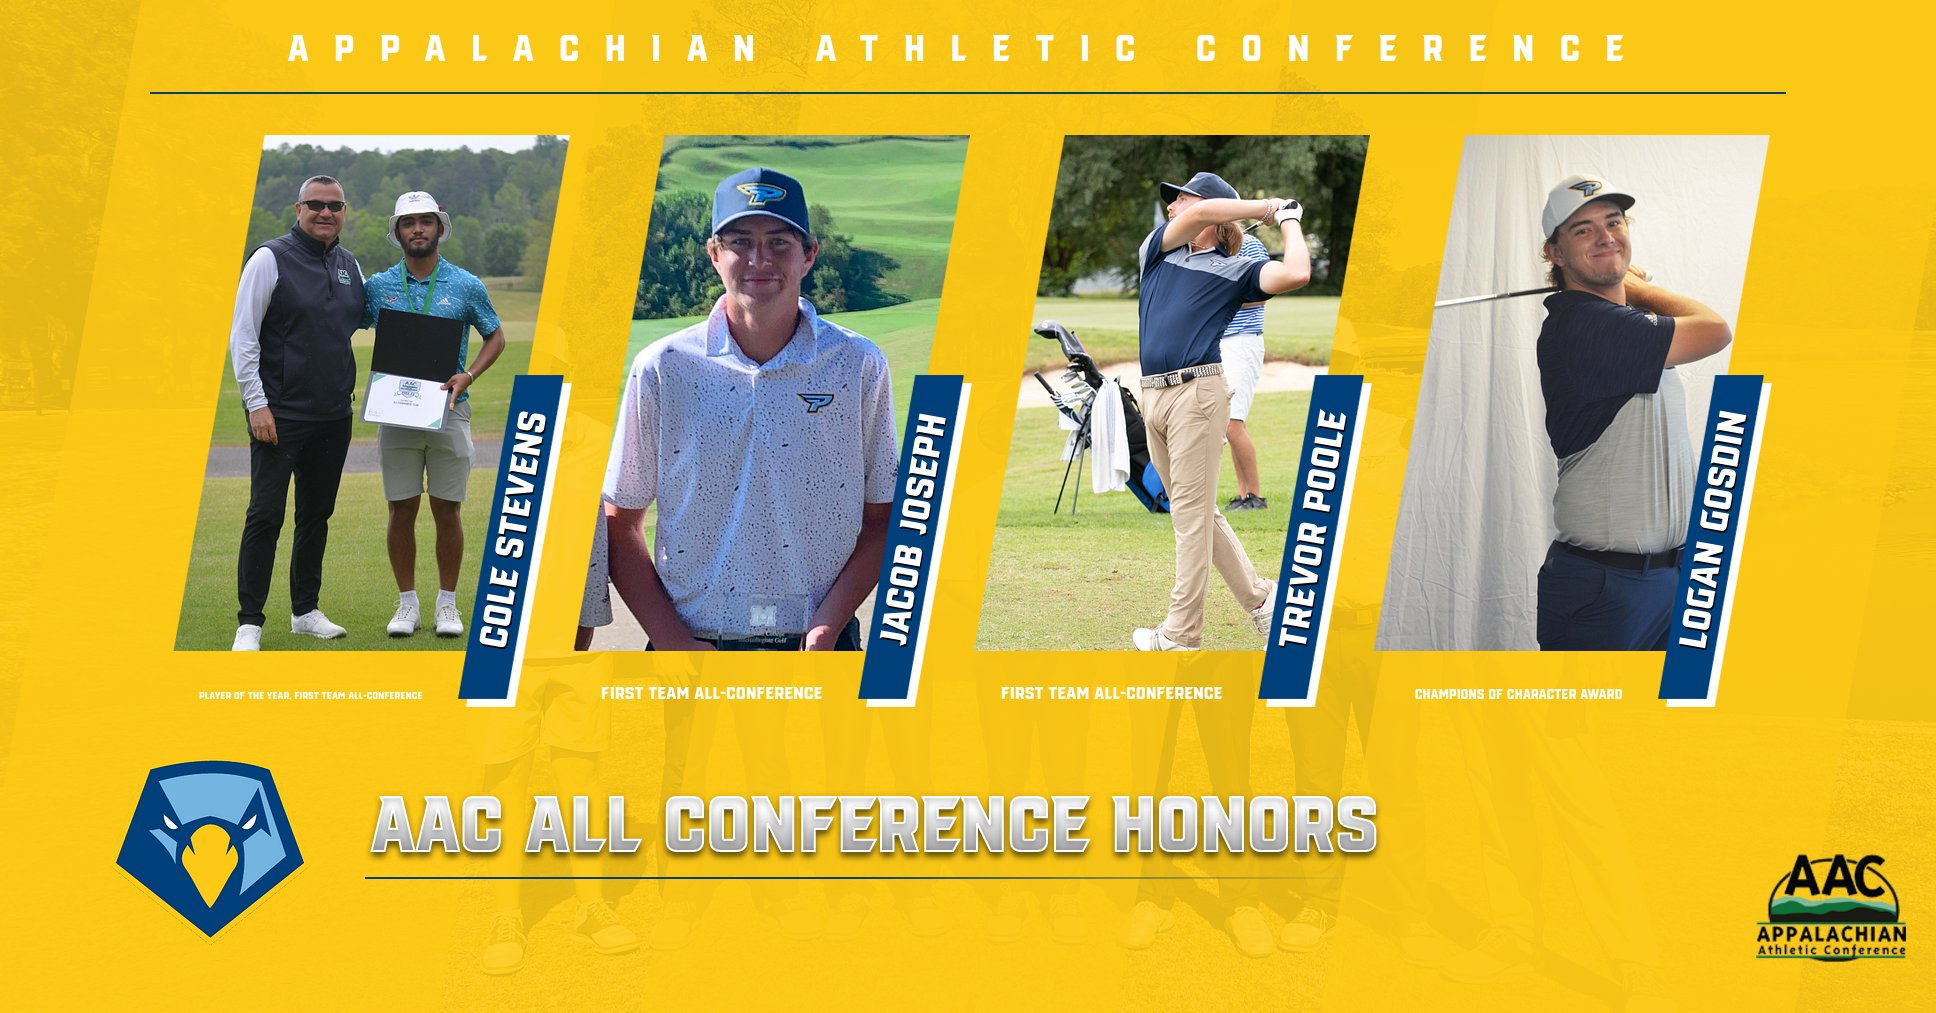 Men’s Golf rewarded with All-Conference Honors